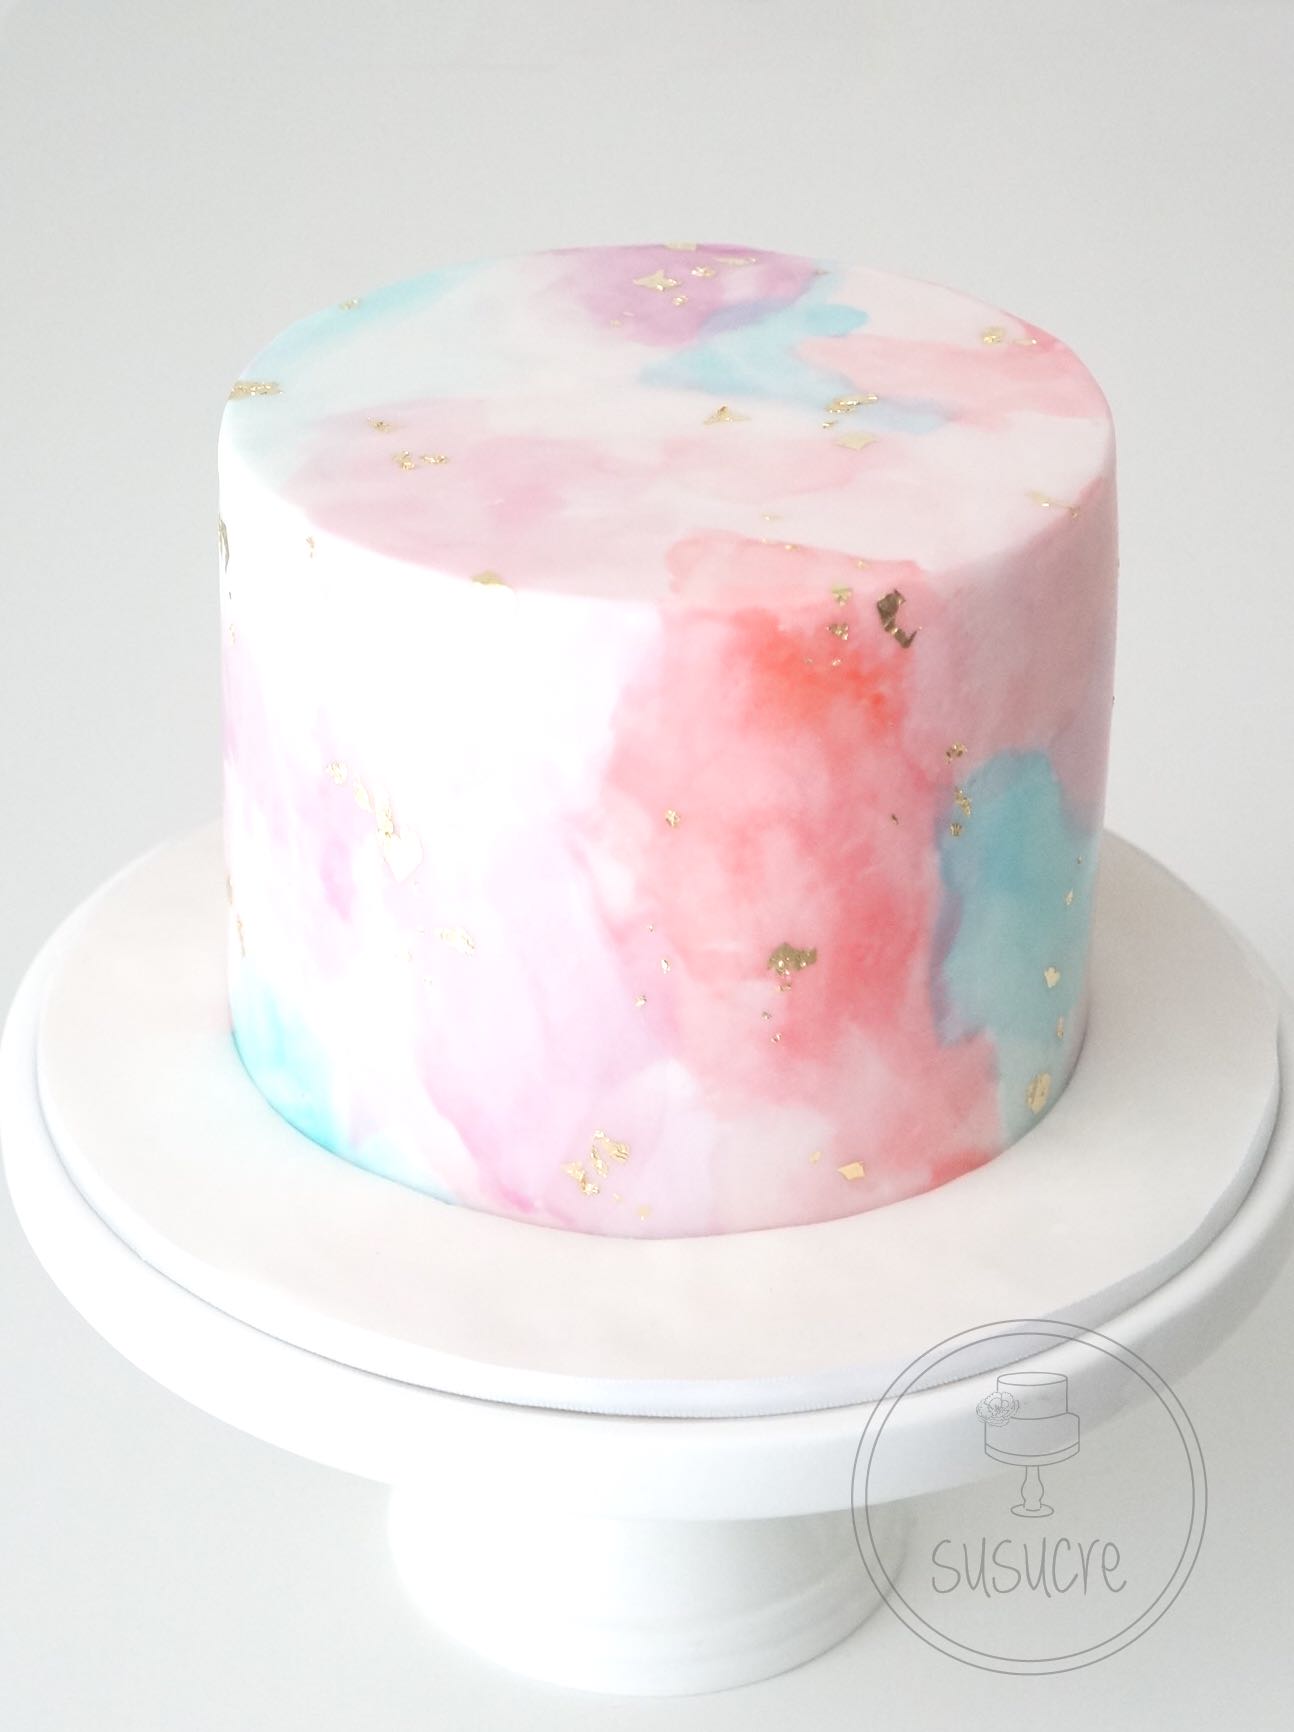 How To Cover A Cake With Three Different Fondant Colors? (Picture Included)  - CakeCentral.com